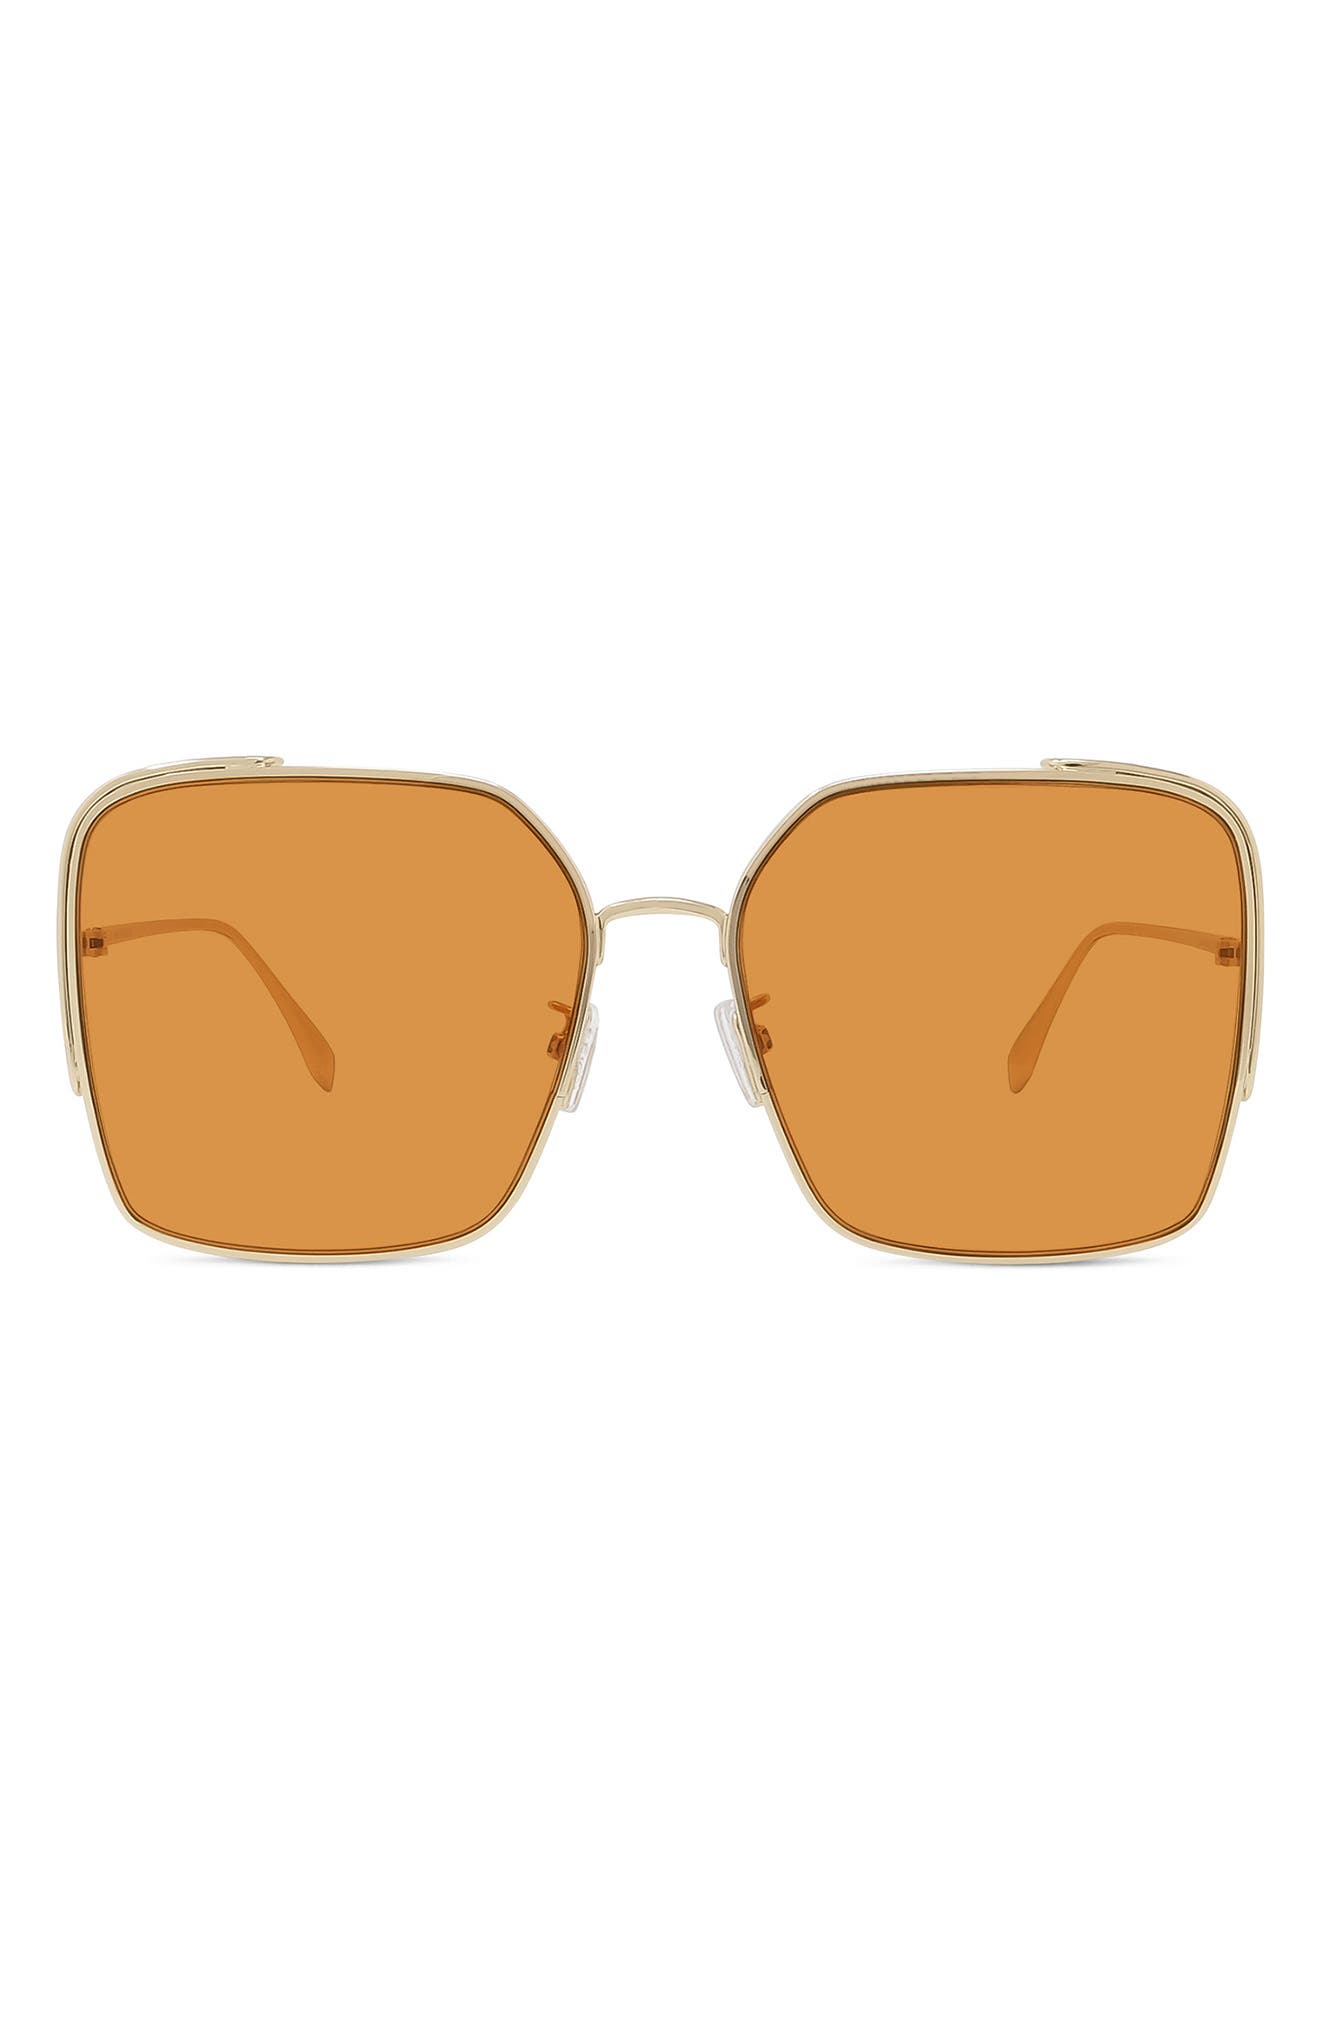 Fendi O'Lock 59mm Square Sunglasses in Shiny Gold/Brown at Nordstrom